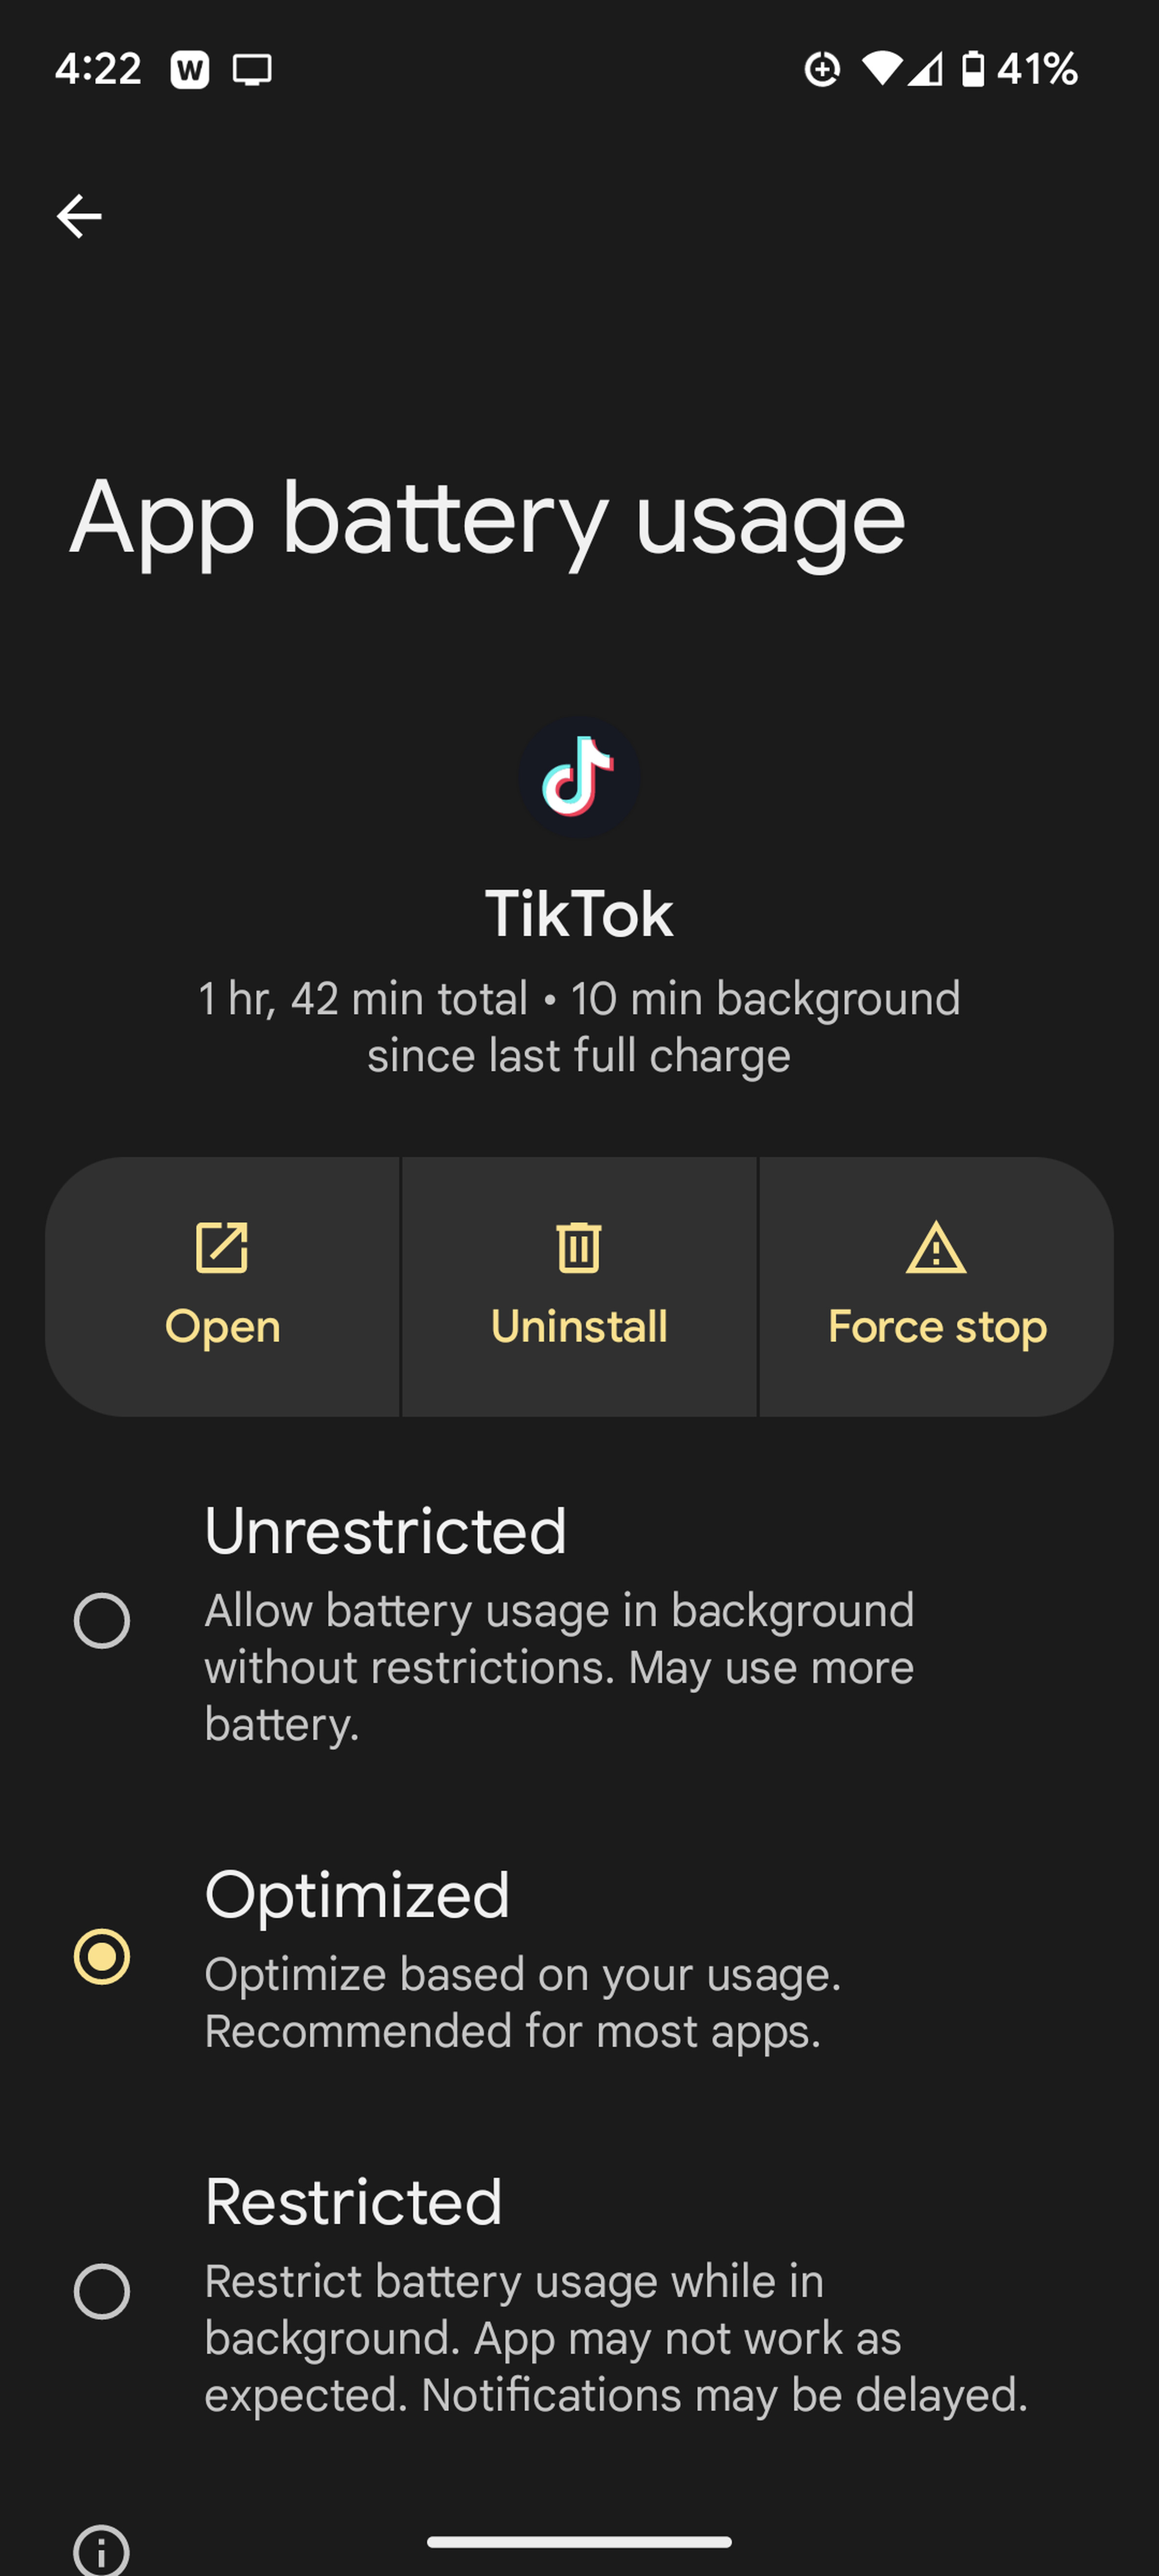 Page headed app battery usage, with TikTok beneat it, three icons beneath that, and checkboxes labeled Unrestricted, Optomized, and Restricted.